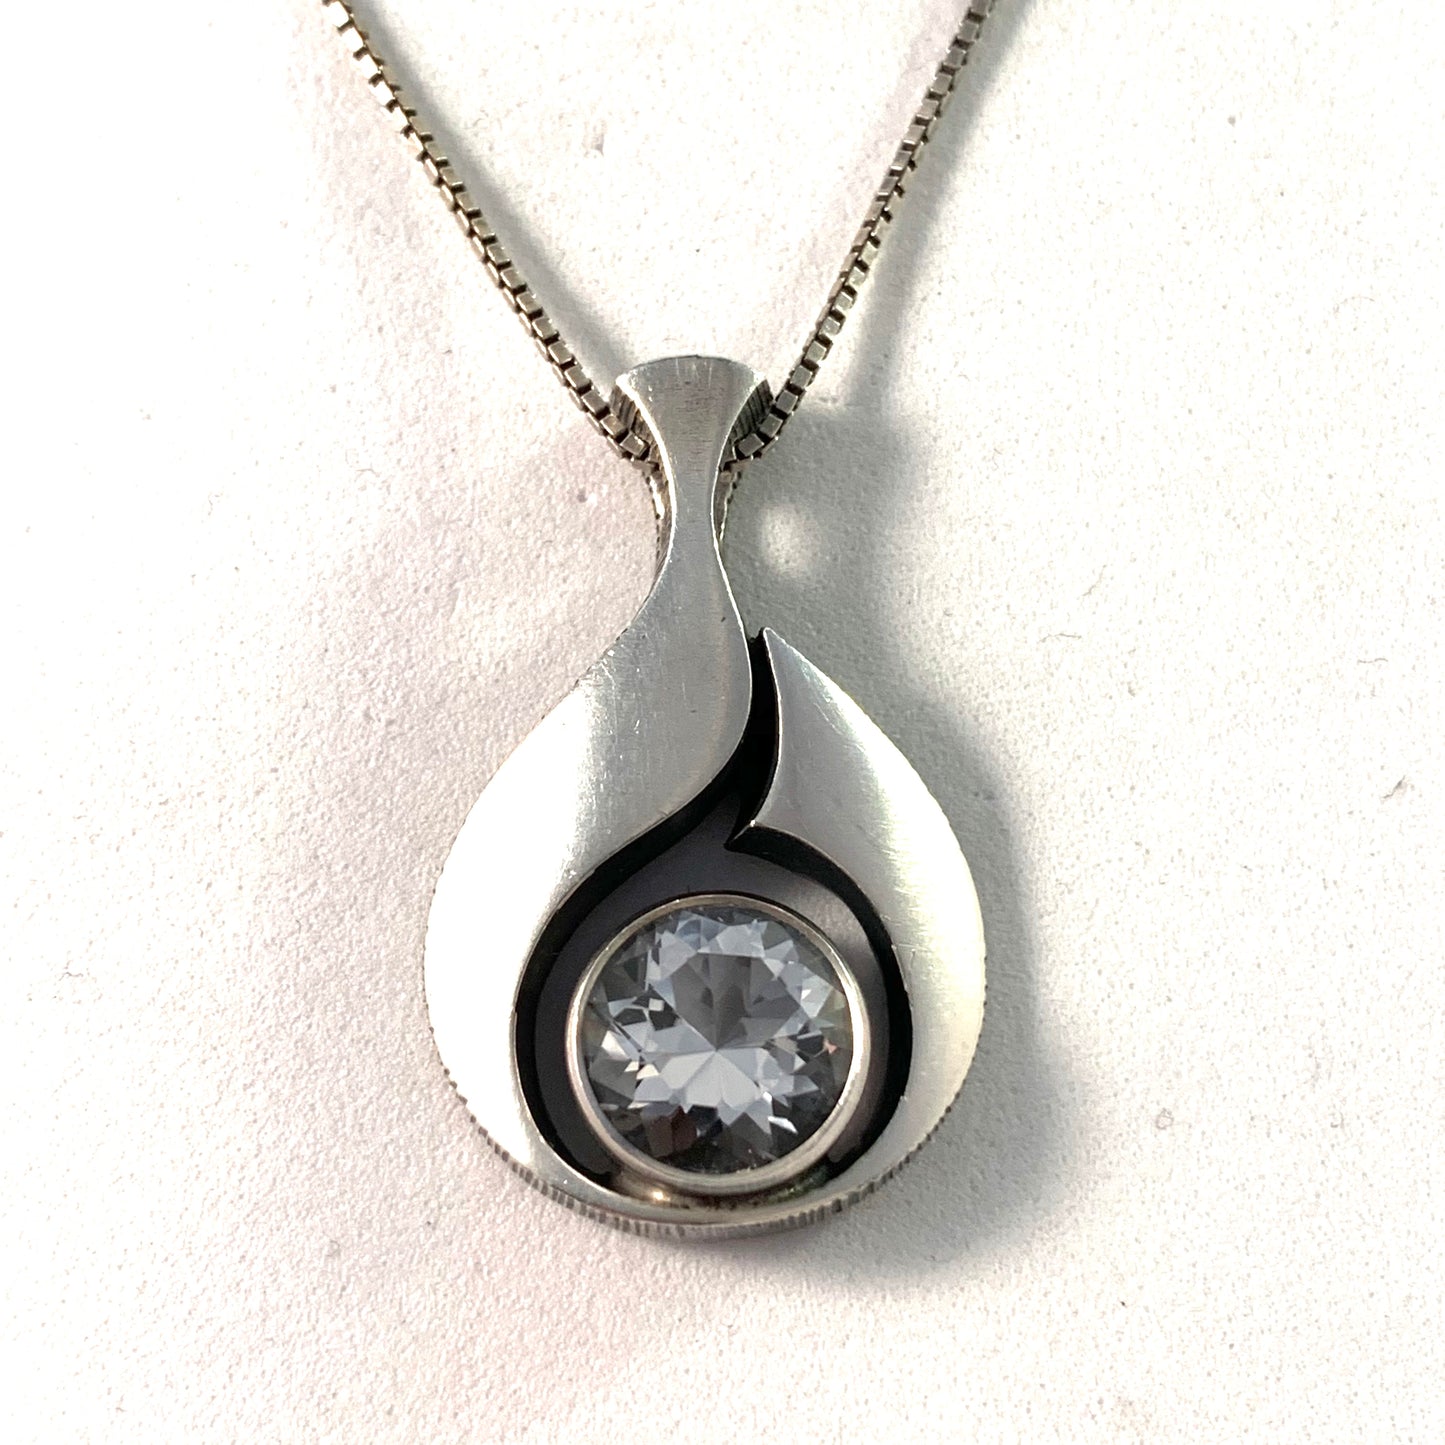 Karl Laine for Finnfeelings, Finland Vintage Sterling Silver Rock Crystal Pendant Necklace. Boxed.